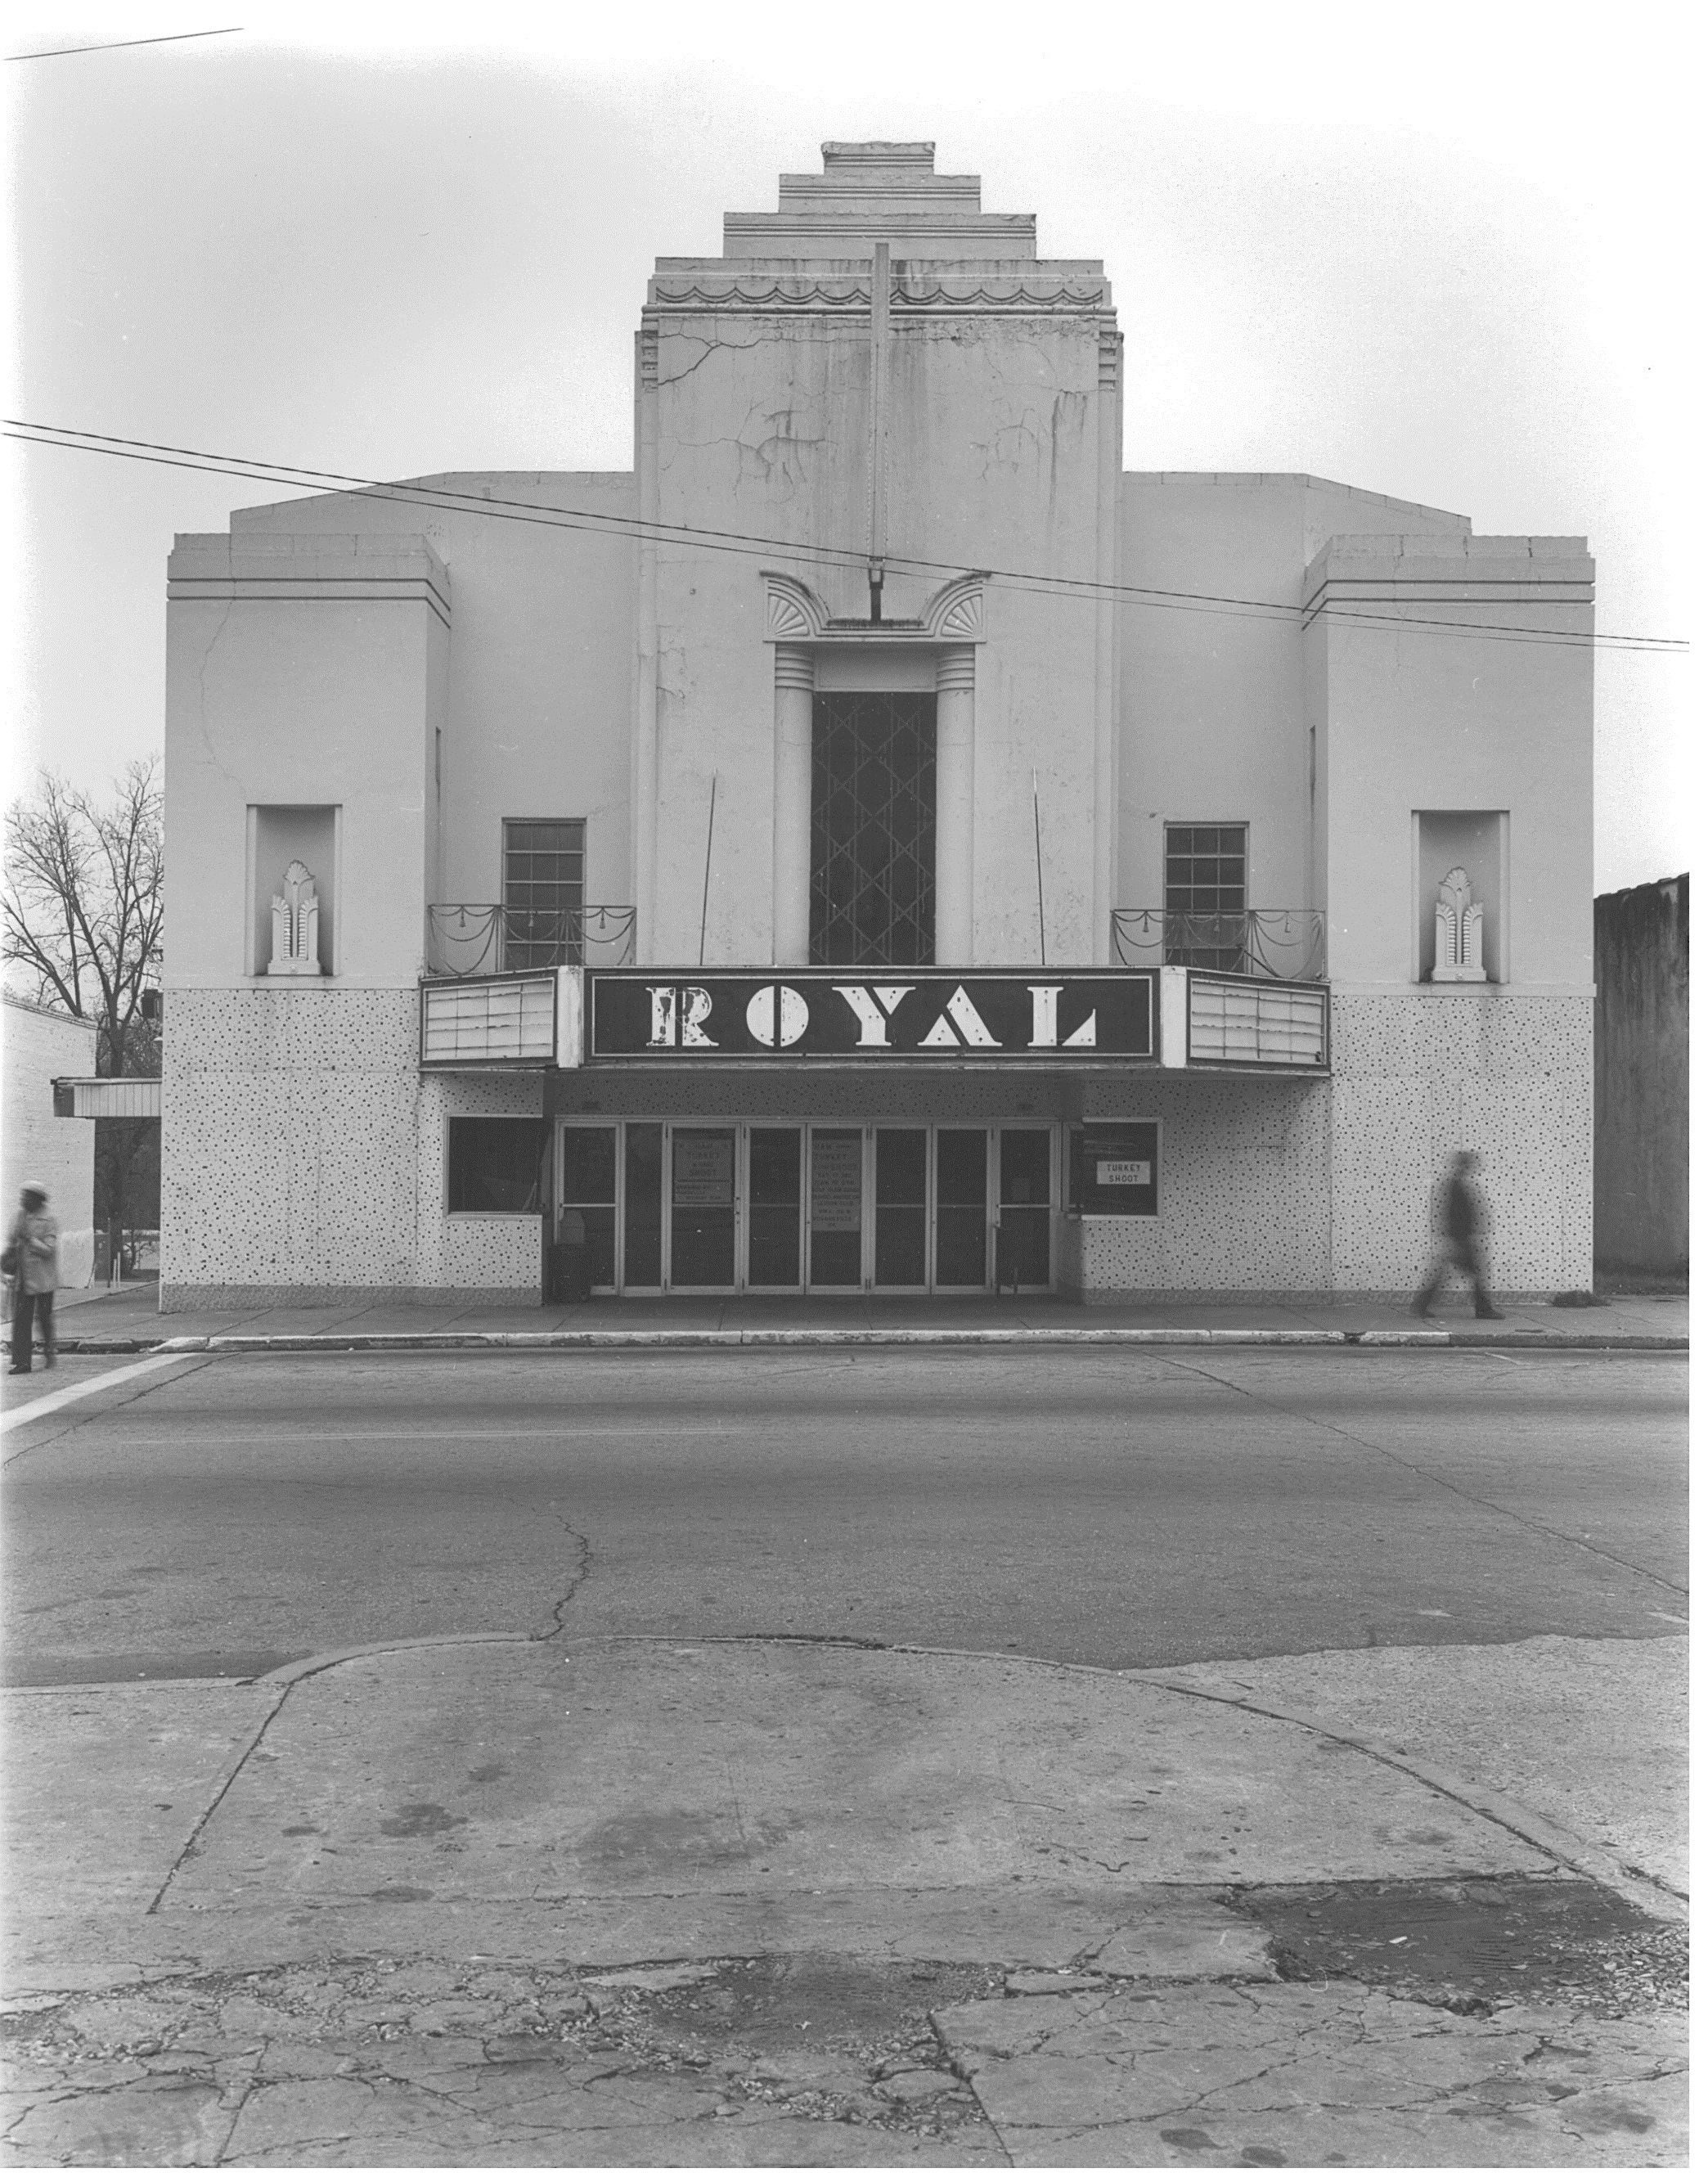 Historical image of Royal Theater Hogansville, GA provided by Troup County Archives circa 1980s